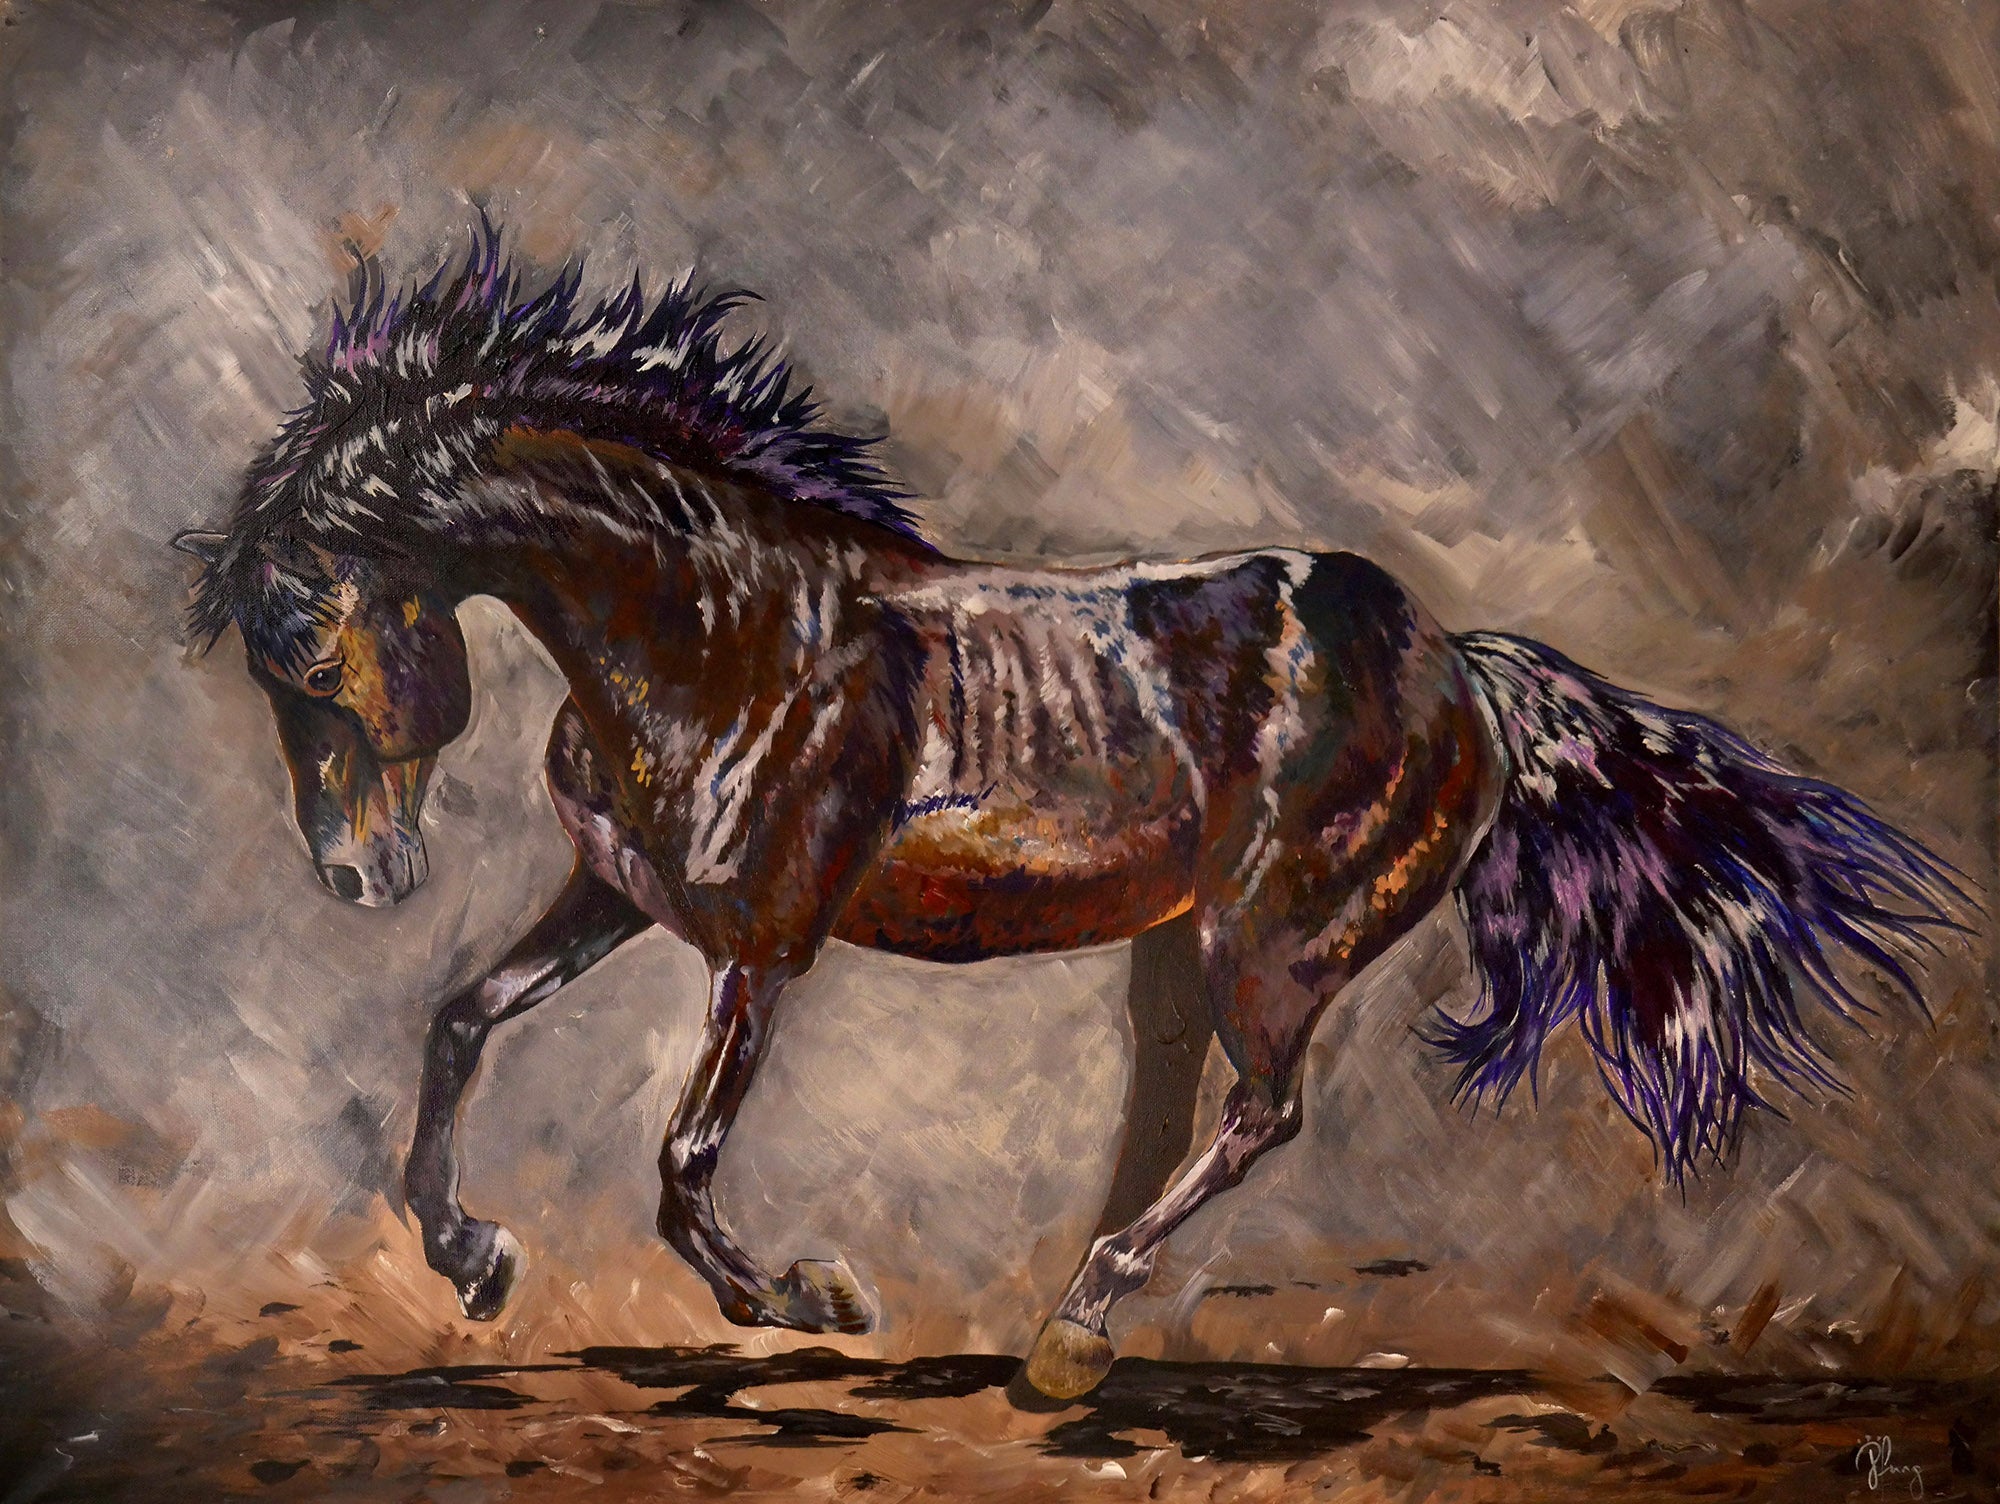 Wildfire-Paint Horse Original Acrylic Painting – Wild Wings